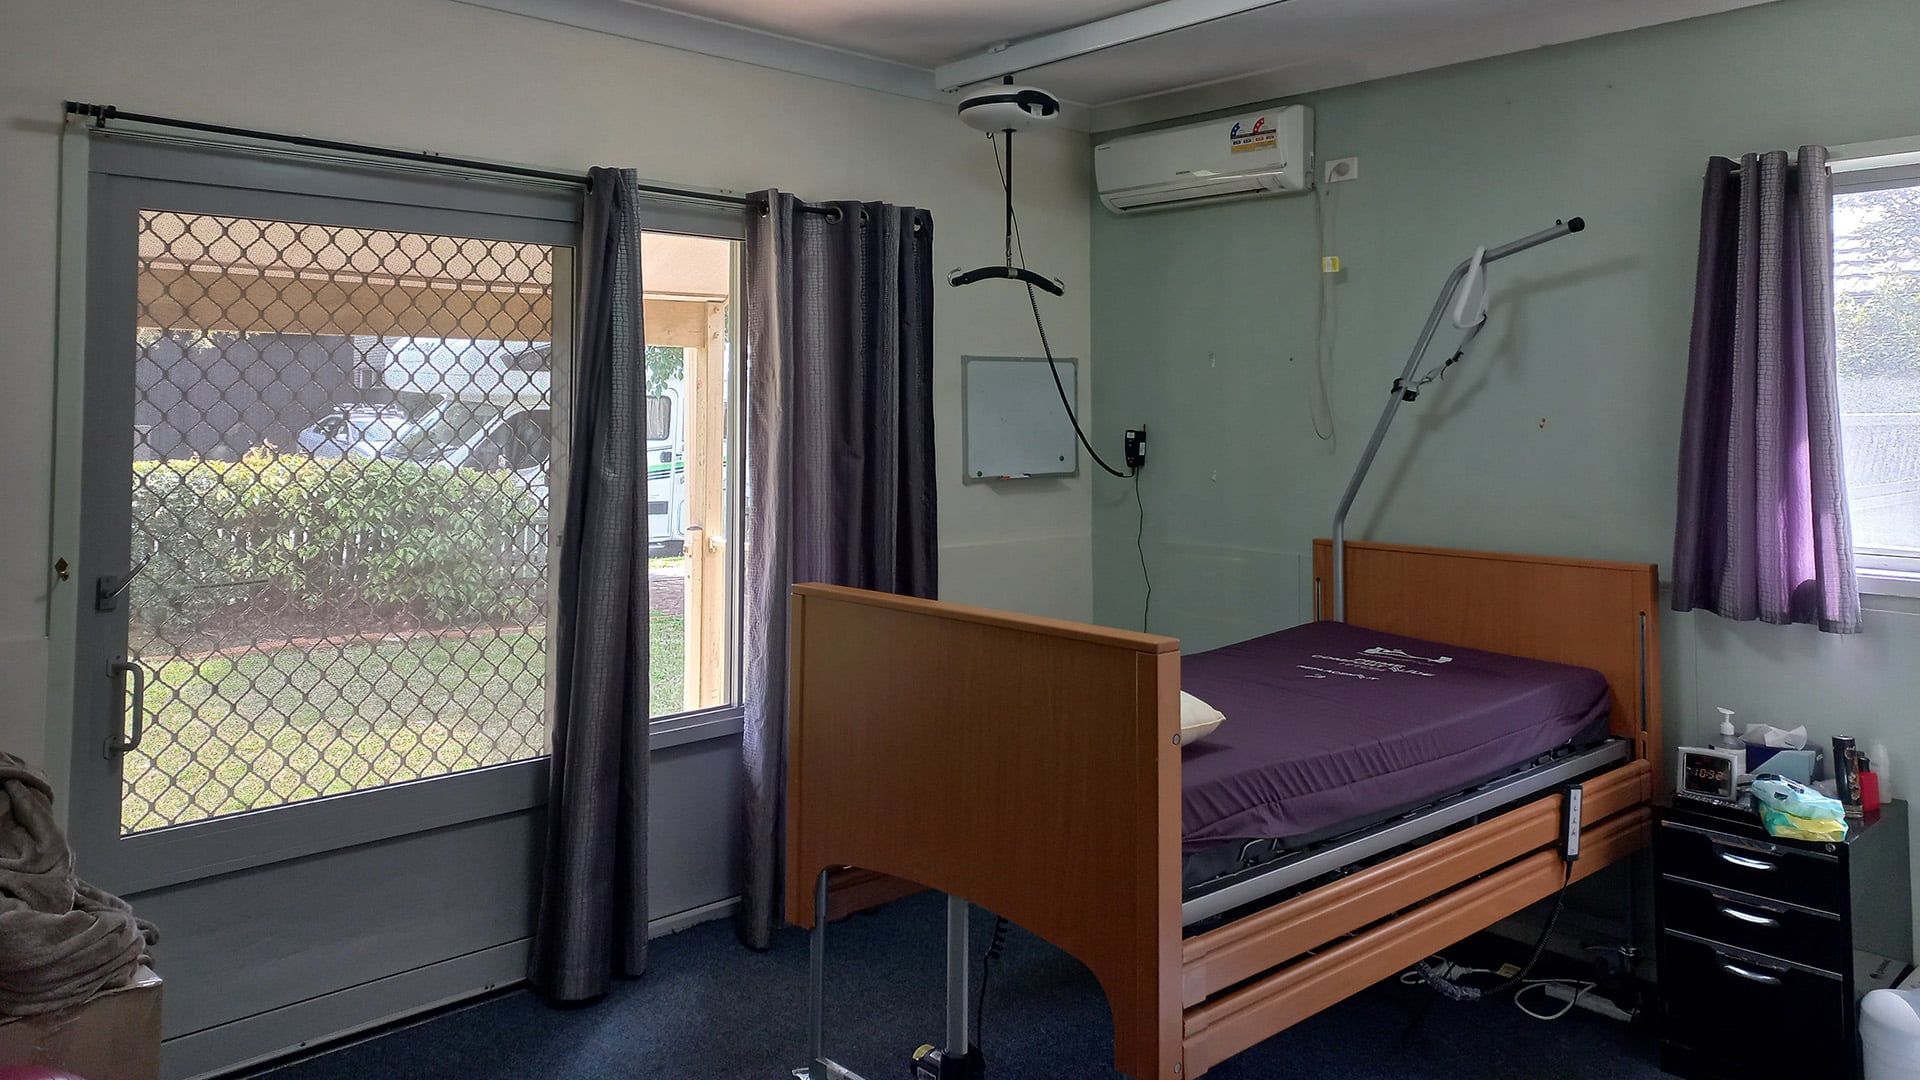 A bedroom with a large secure window, a bed with hoist supports and air conditioning.